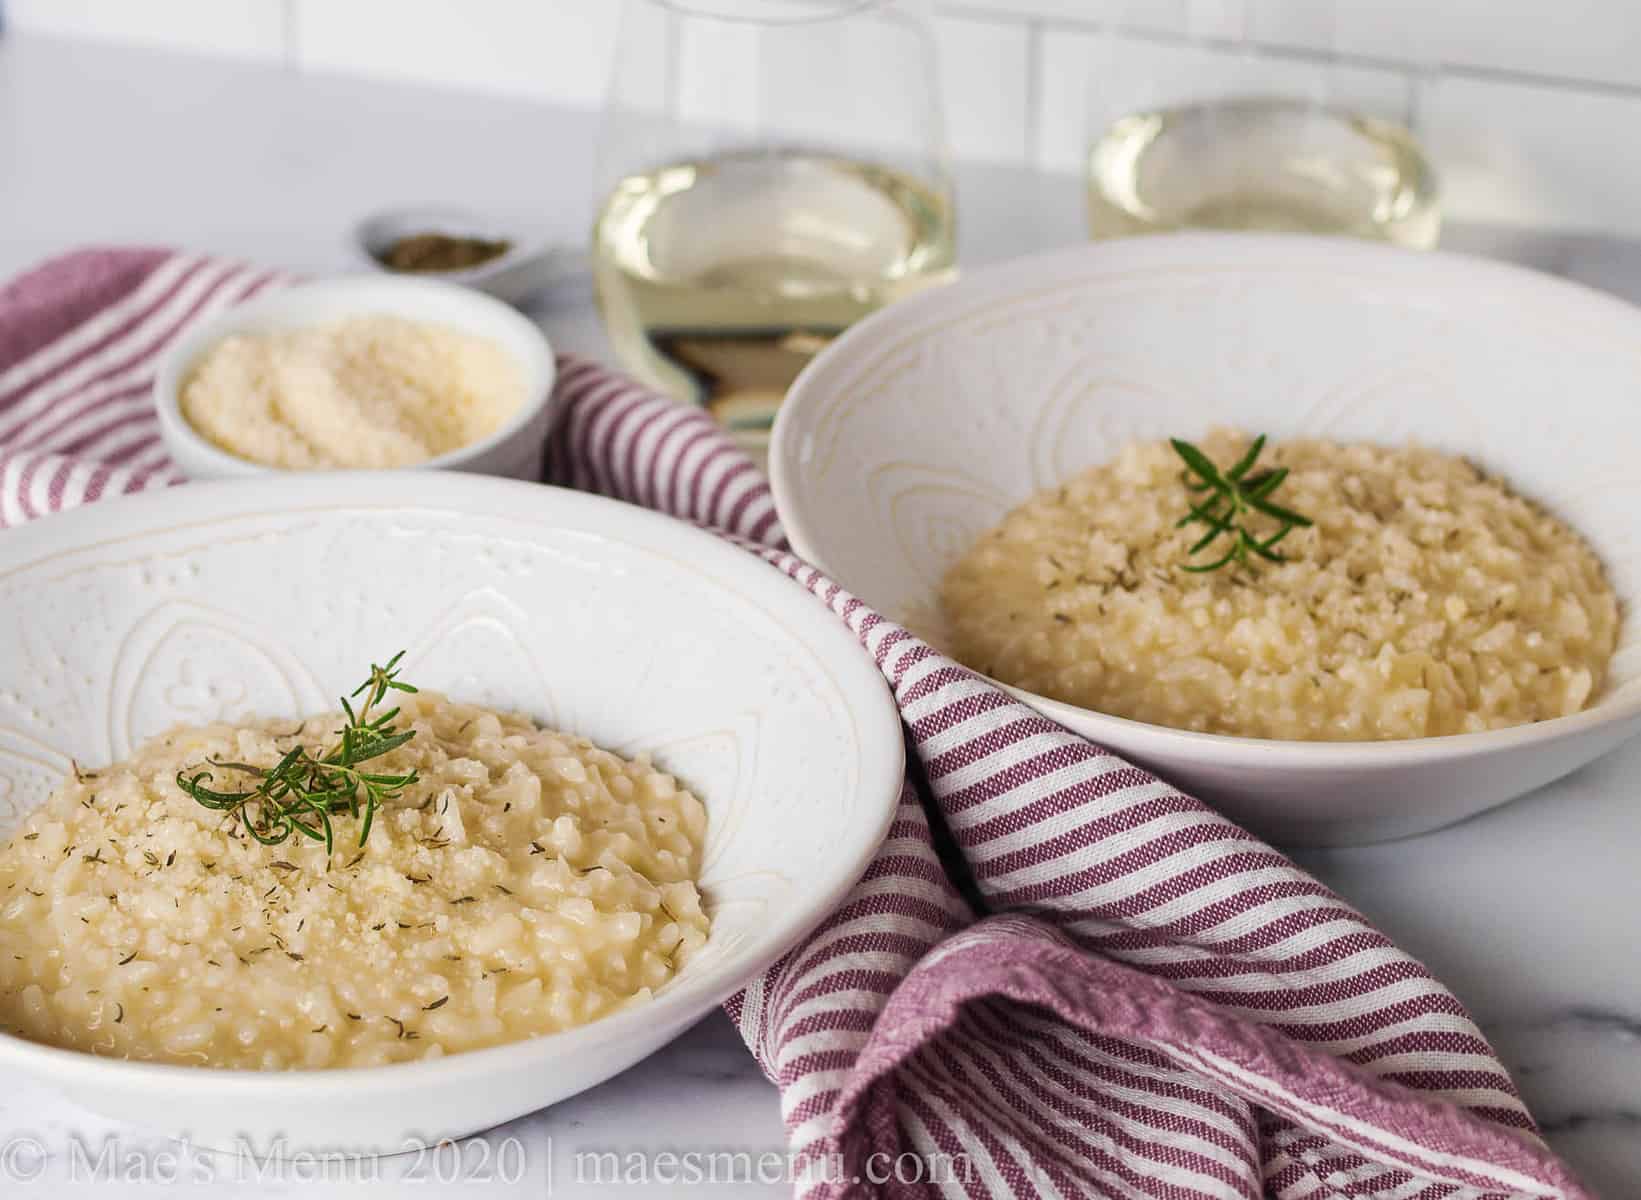 Two white bowls of risotto next to glasses of white wine, parmesan cheese, and a purple striped towel